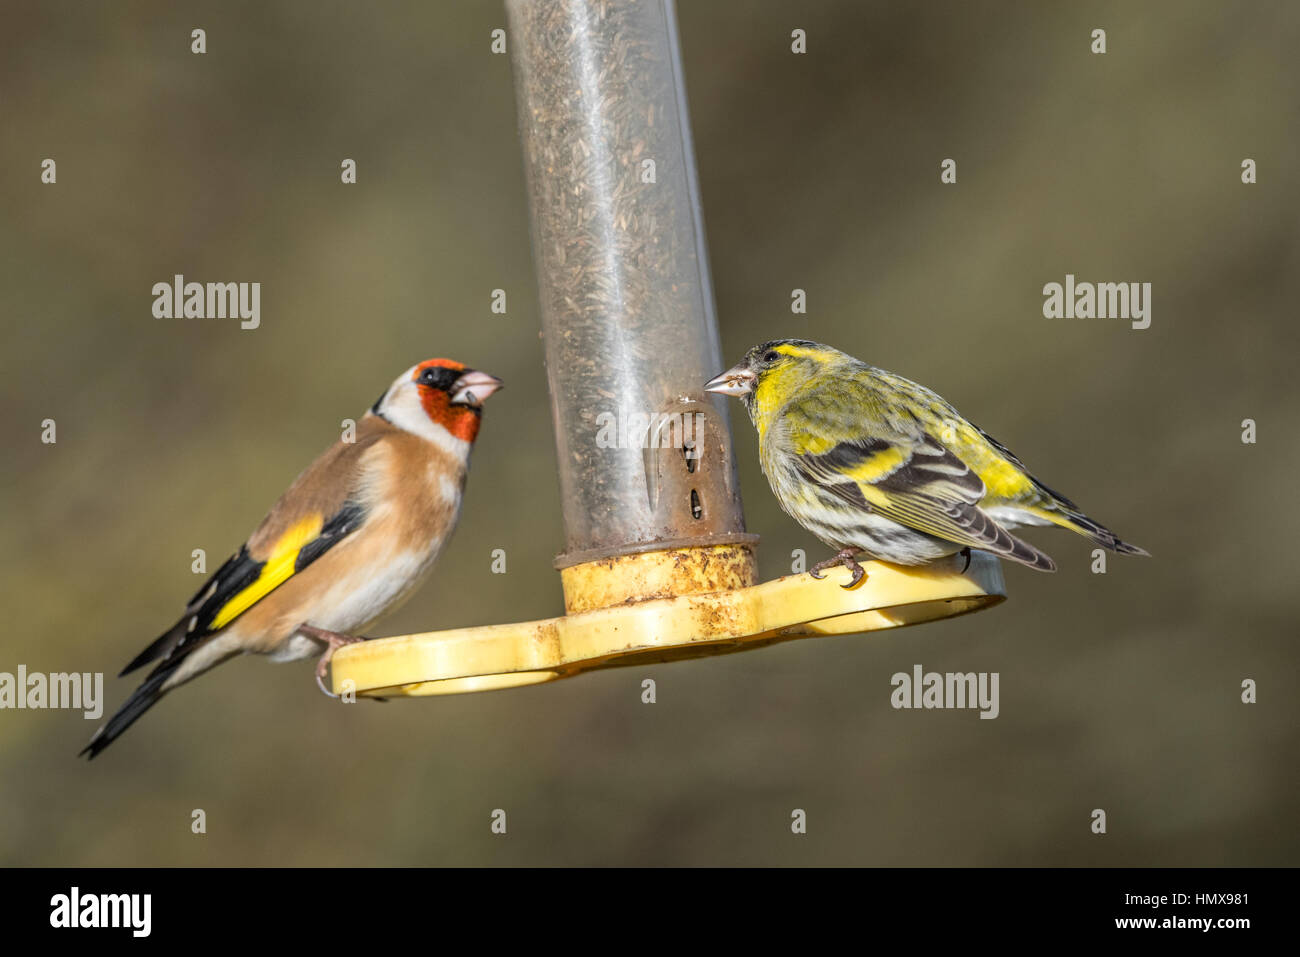 Adult Goldfinch and Siskin feeding from a plastic bird feeder. Stock Photo